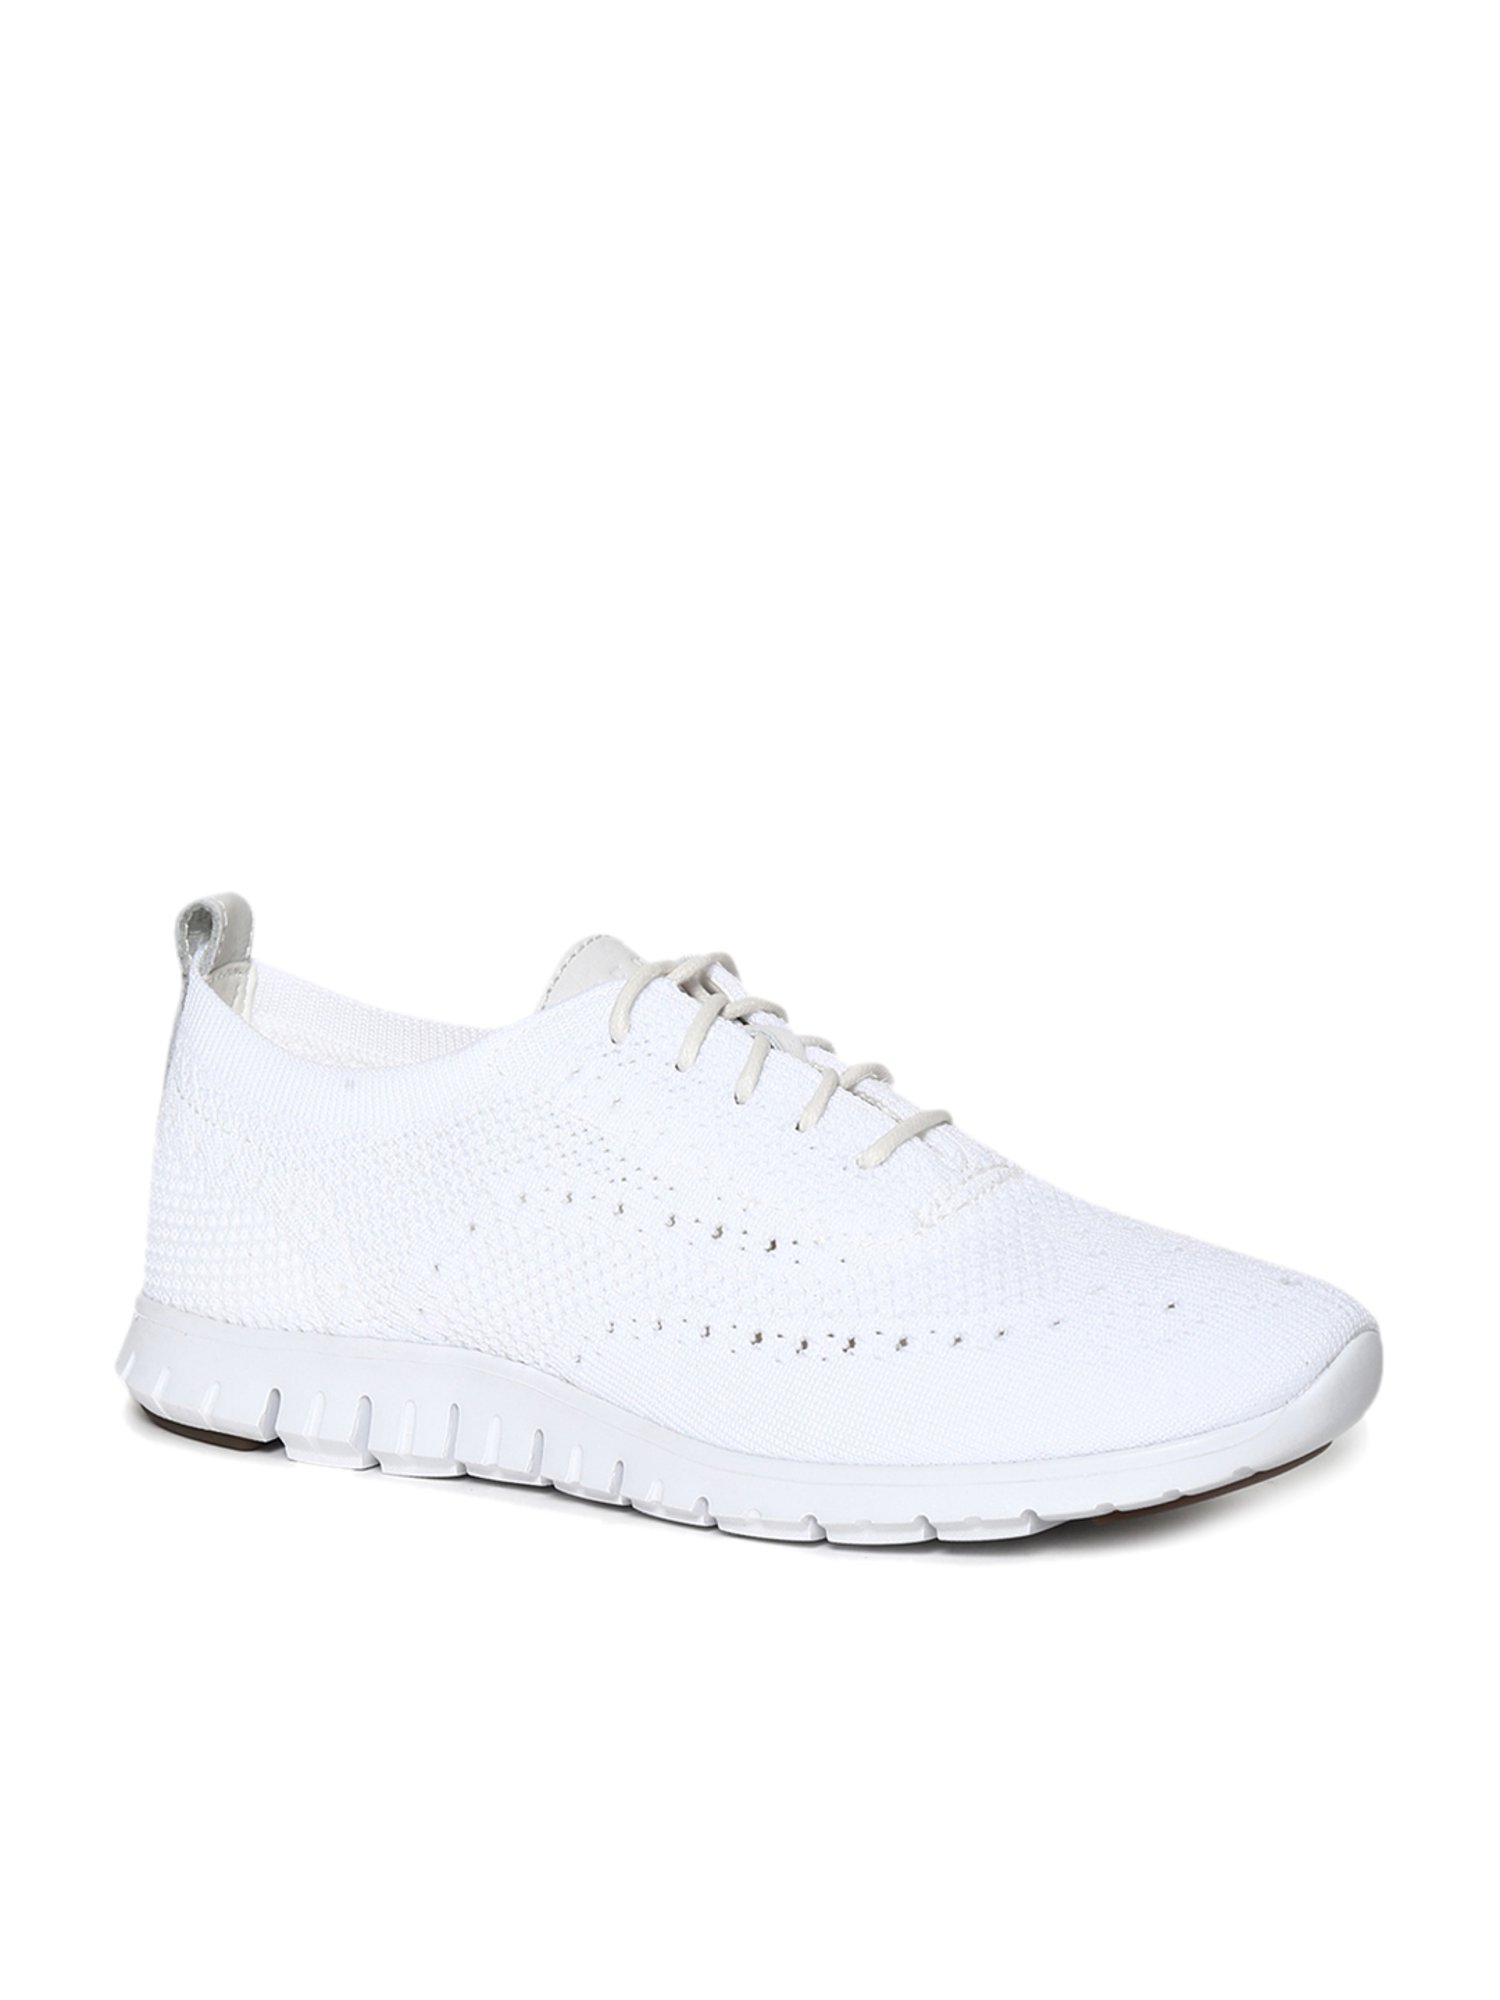 cole haan white sneakers